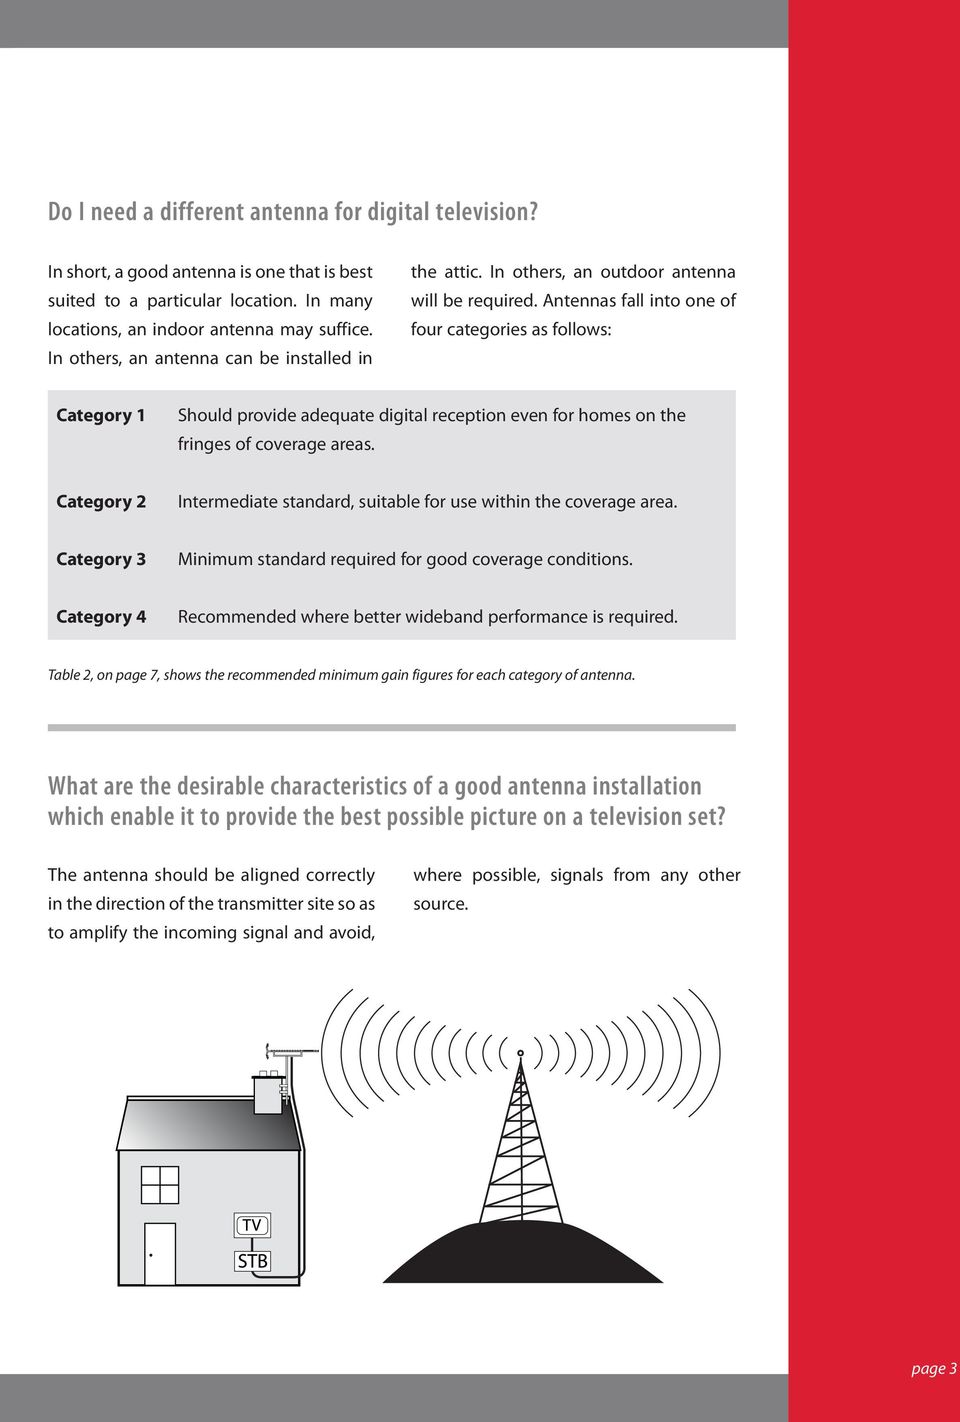 Antennas fall into one of four categories as follows: Category 1 Should provide adequate digital reception even for homes on the fringes of coverage areas.